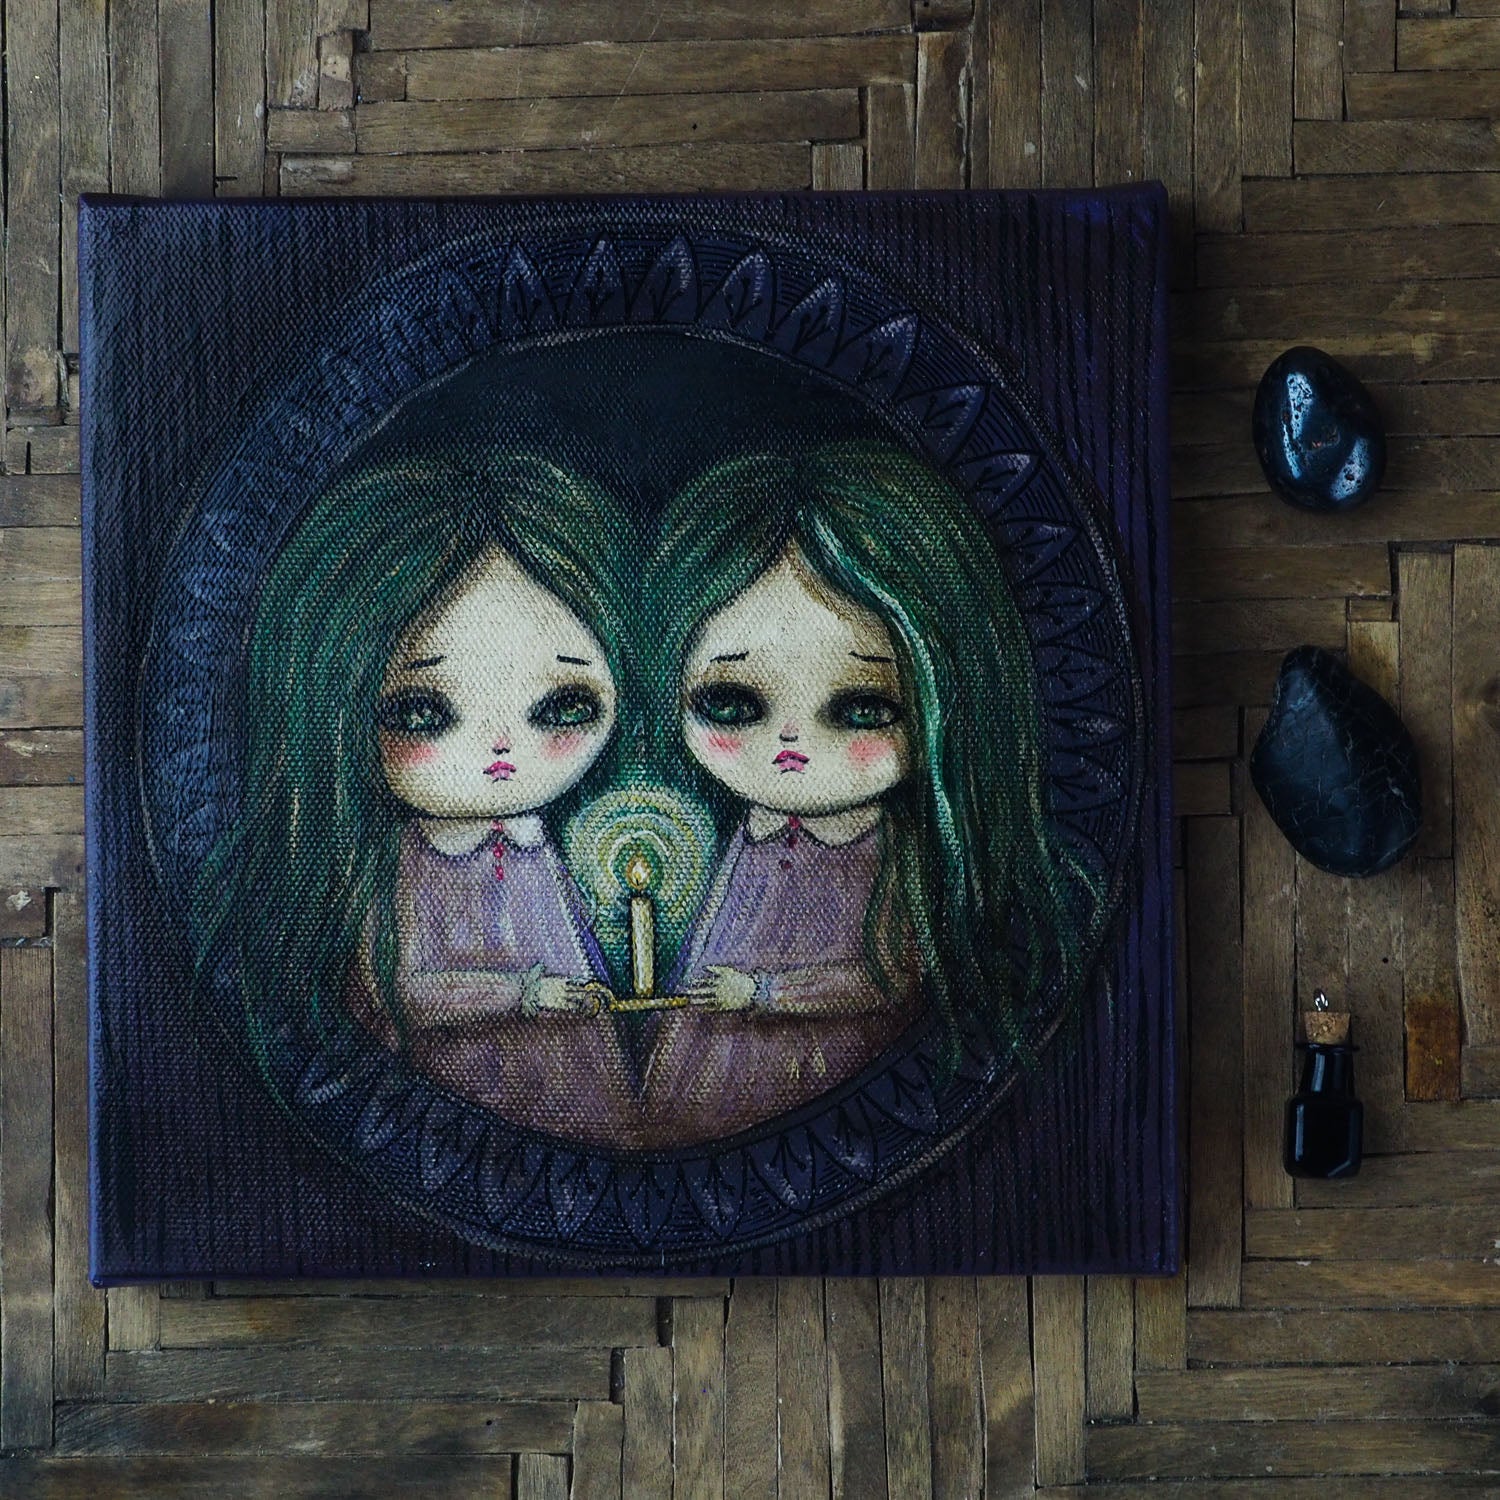 Sisters by candle light: An original mixed media painting by Danita. Mystery and horror mix in a whimsical image of two sisters exploring a haunted mansion by candlelight. Made with acrylics, oils, pencils, graphite and more over a stretched canvas.